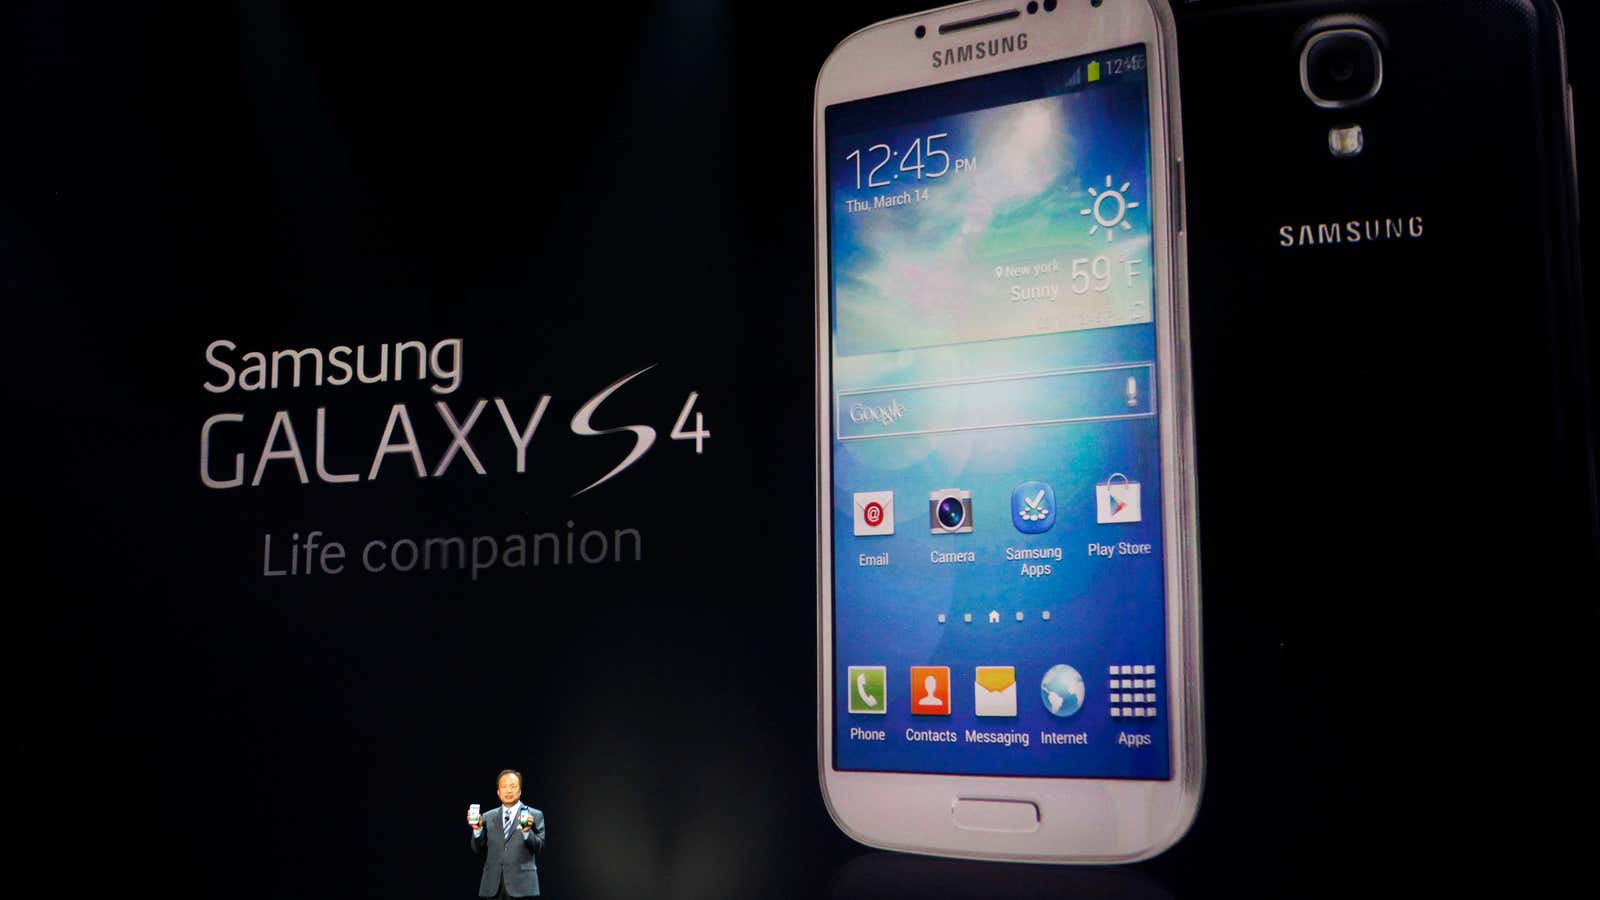 Samsung’s Galaxy S4: too big for its britches?